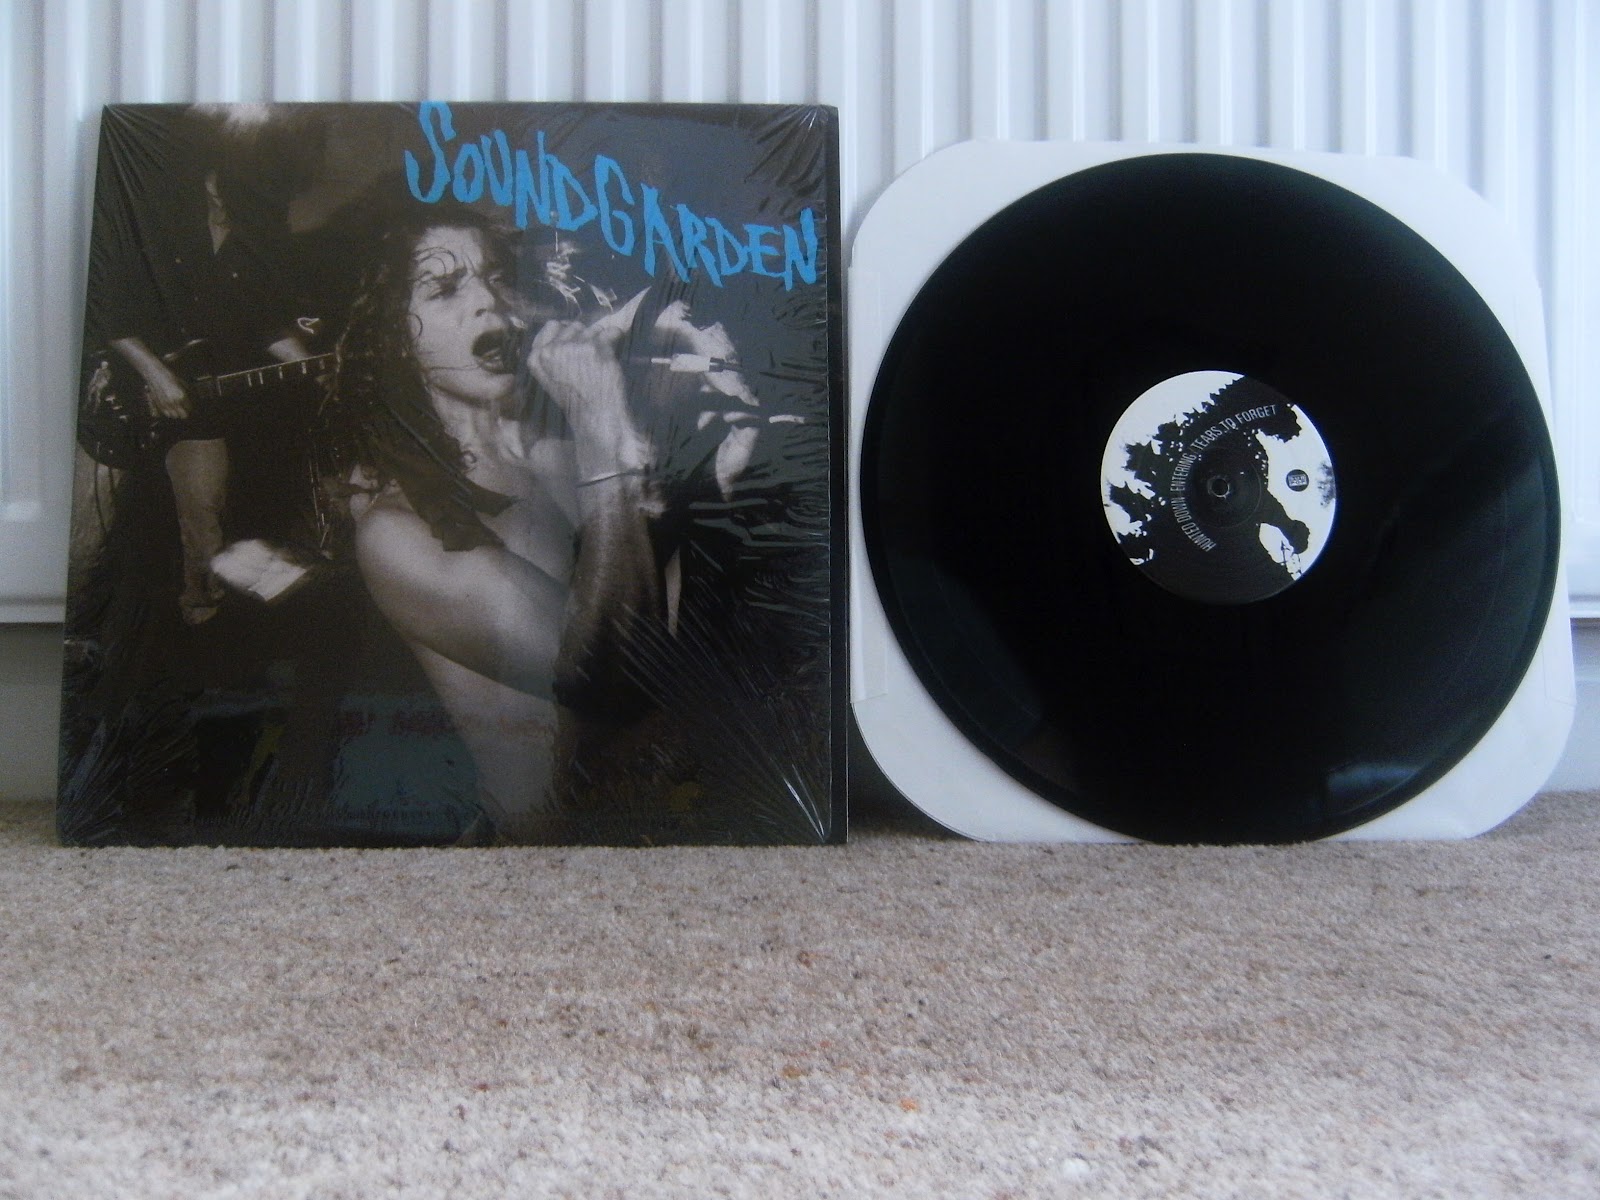 These LPs: Soundgarden - Screaming Life EP